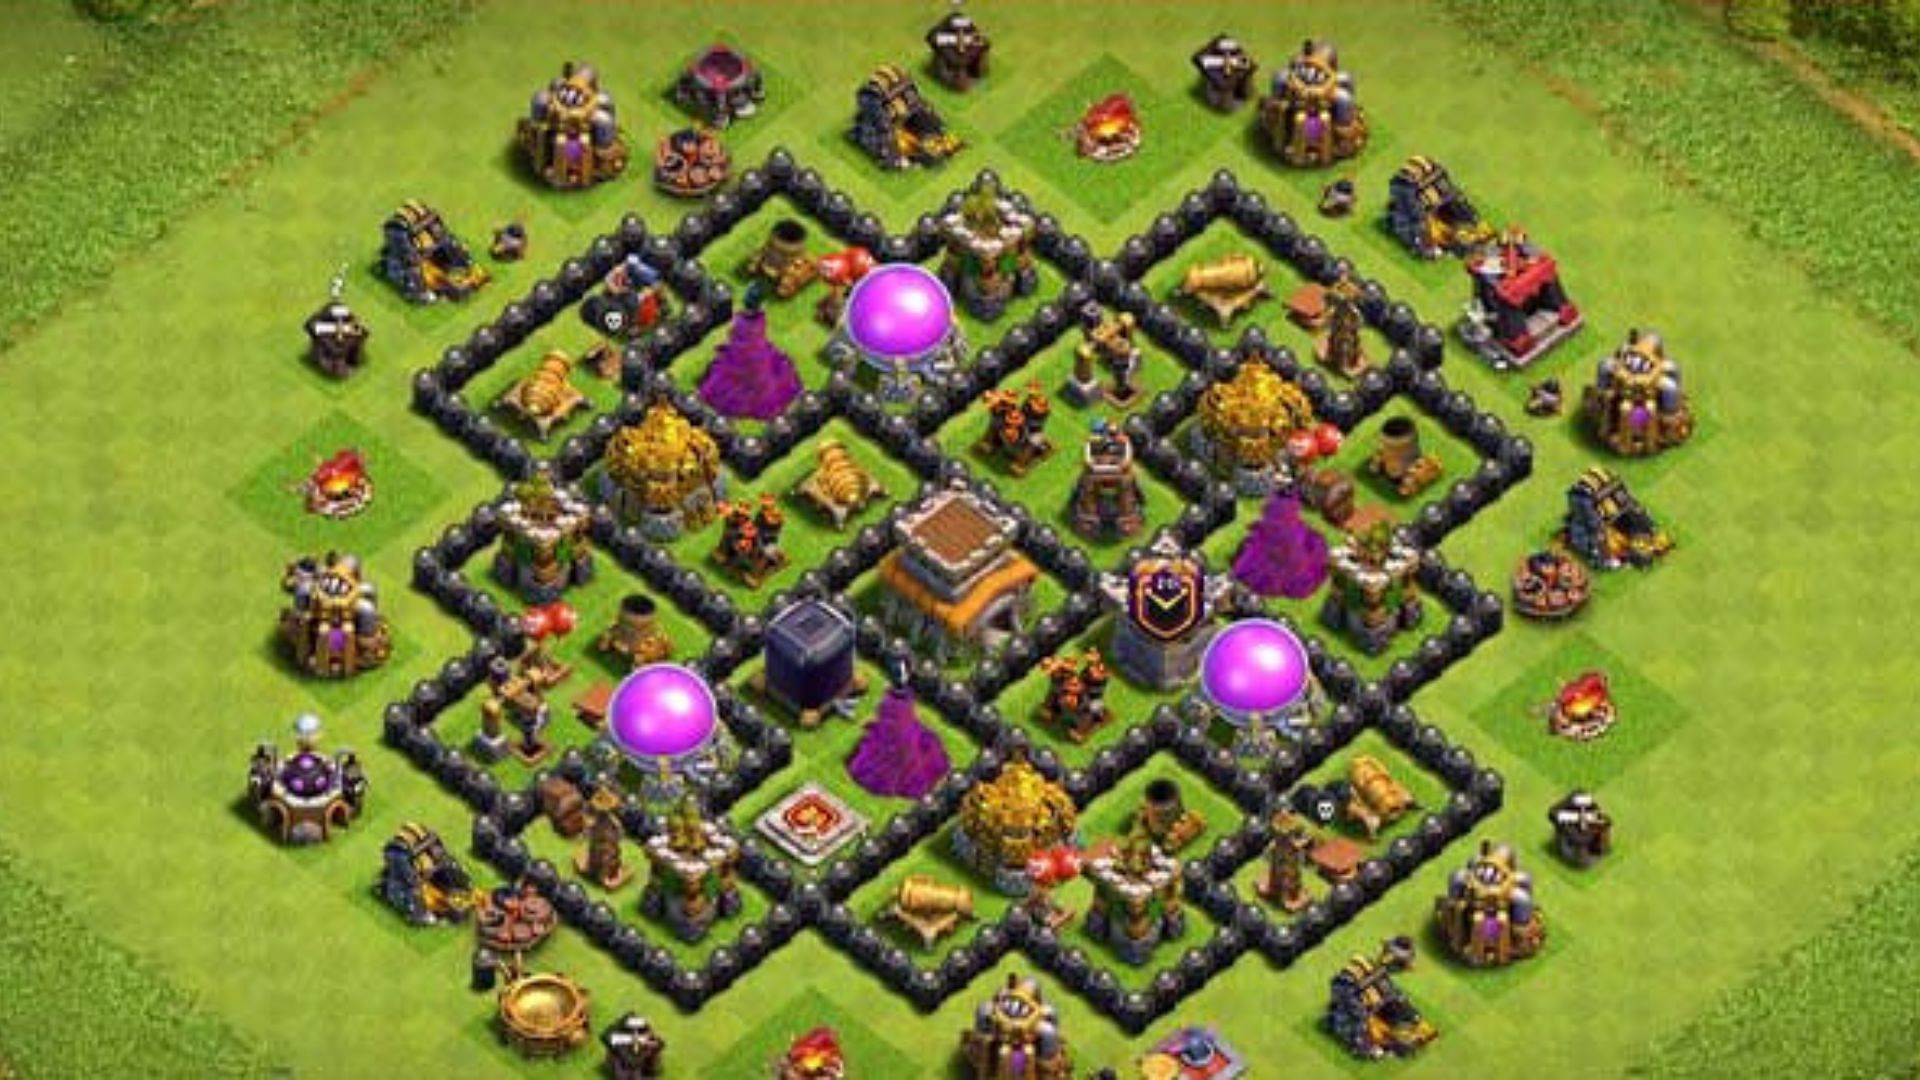 Closed Wall Ring bases (Image via SuperCell)